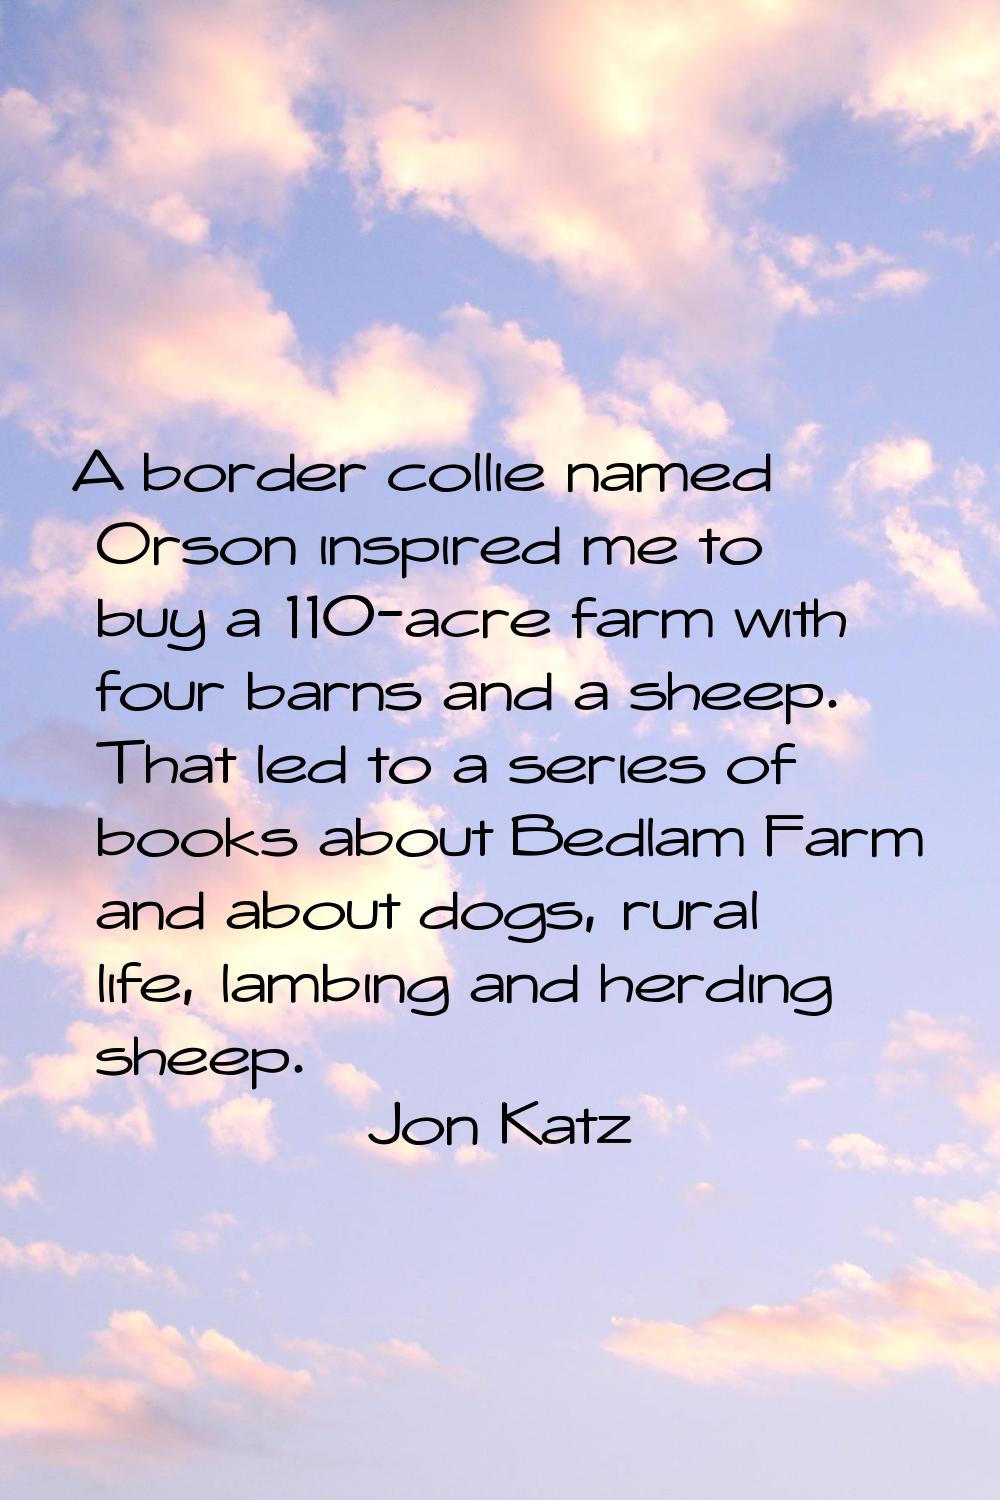 A border collie named Orson inspired me to buy a 110-acre farm with four barns and a sheep. That le